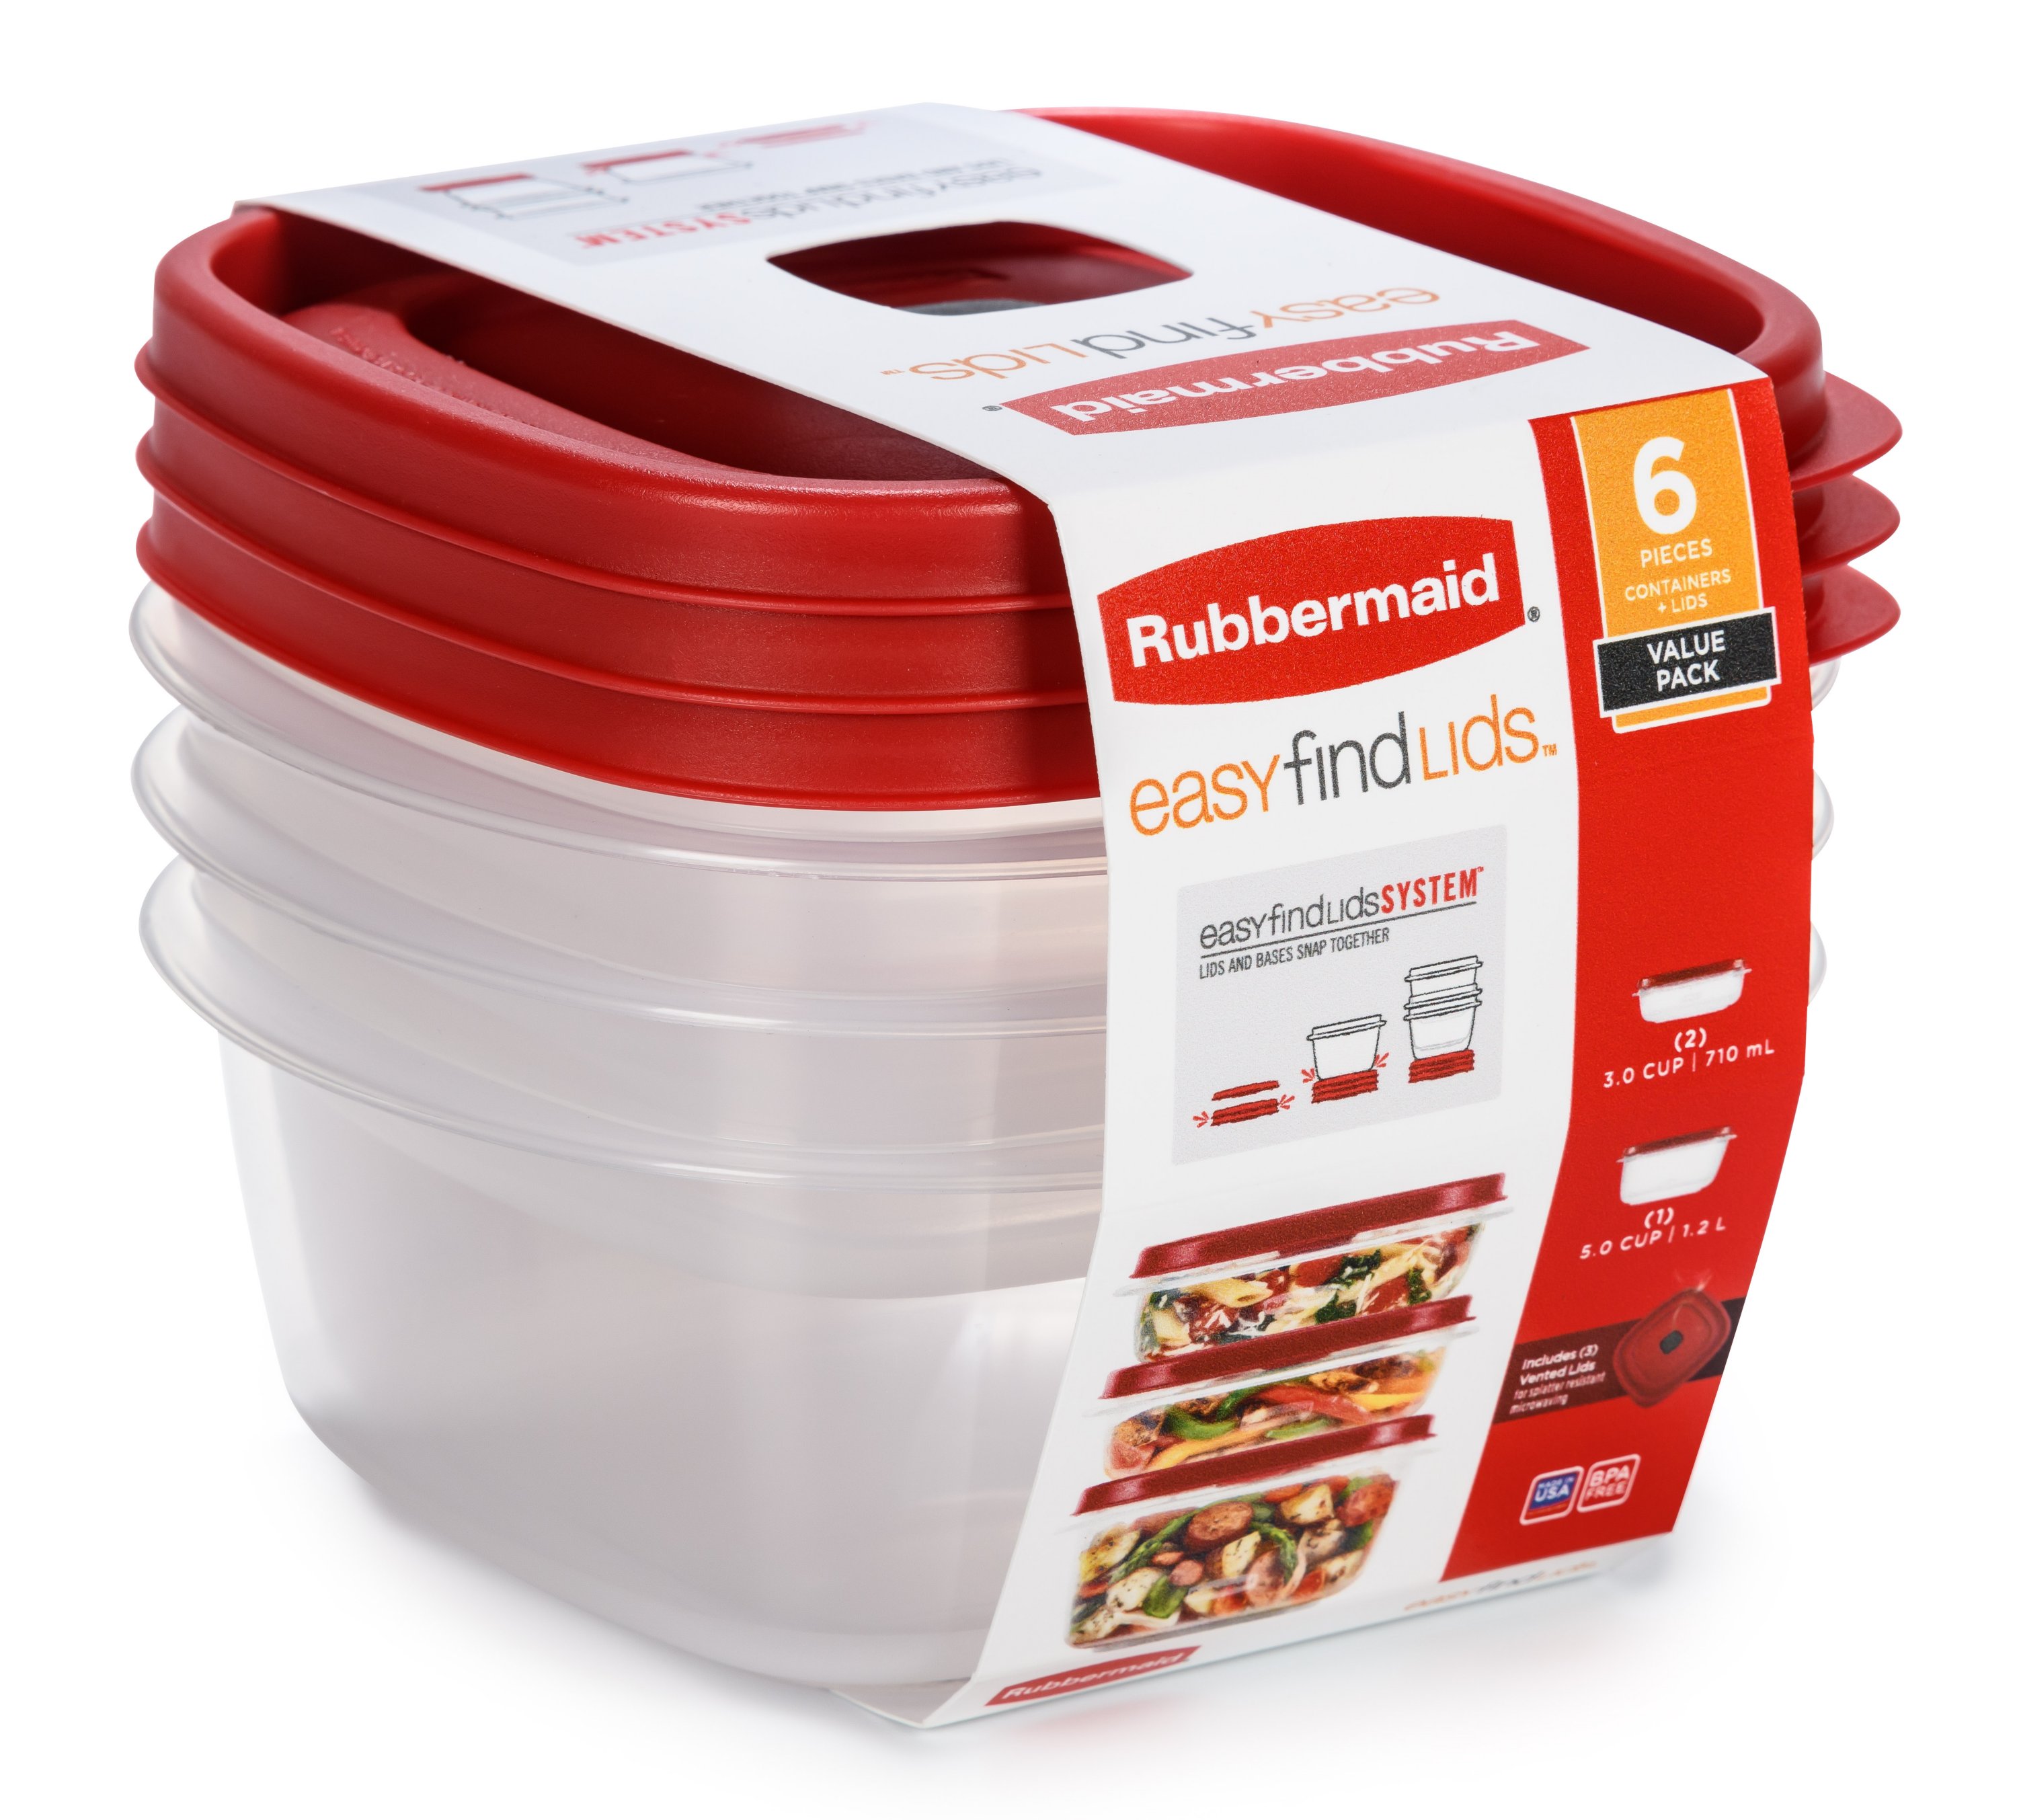  Rubbermaid Easy Find Lids Food Storage Container, 2.5